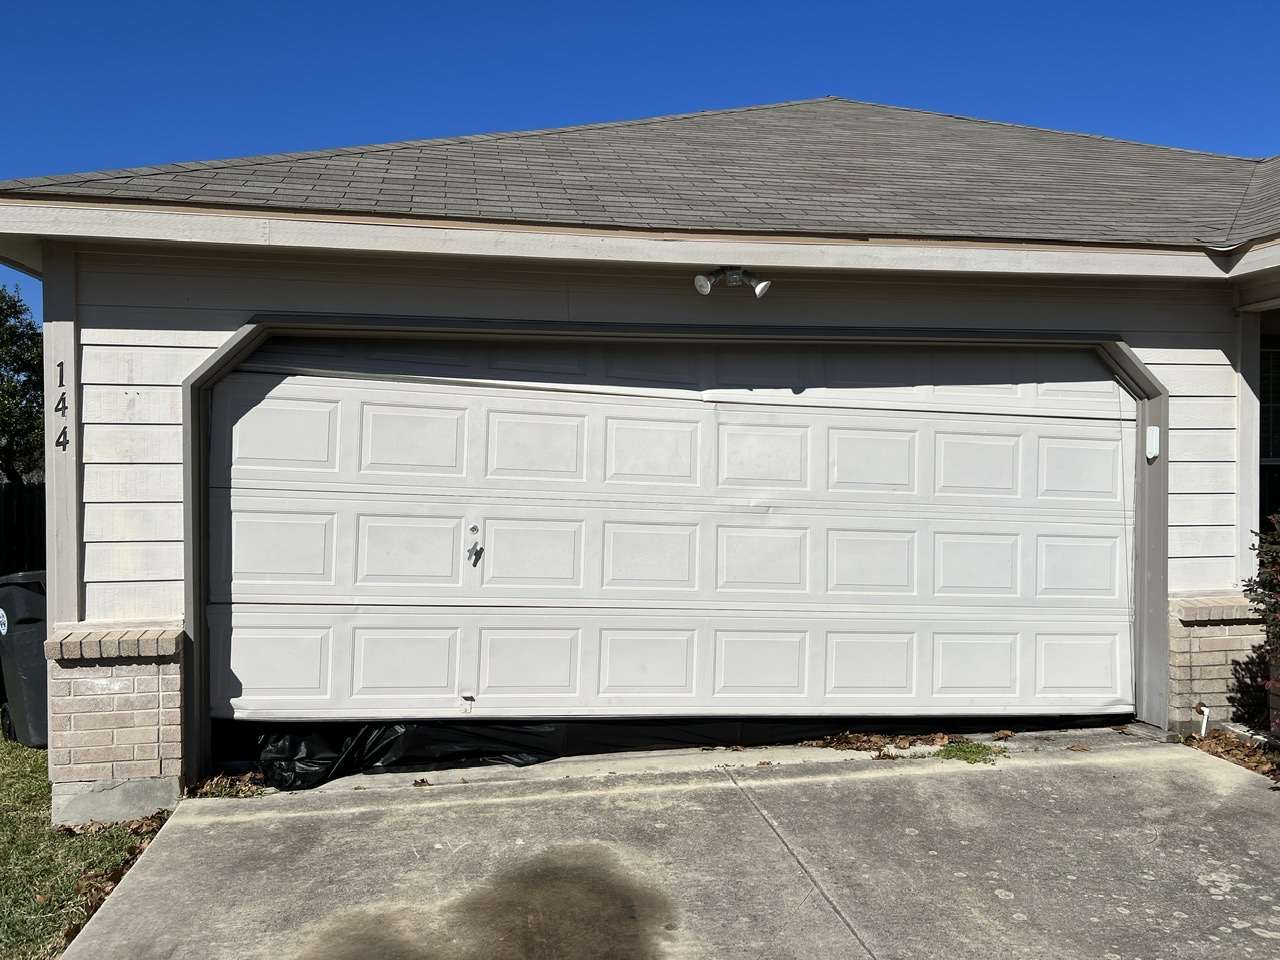 This is a basic off track garage door that can be repaired quickly by a qualifed garage door company.